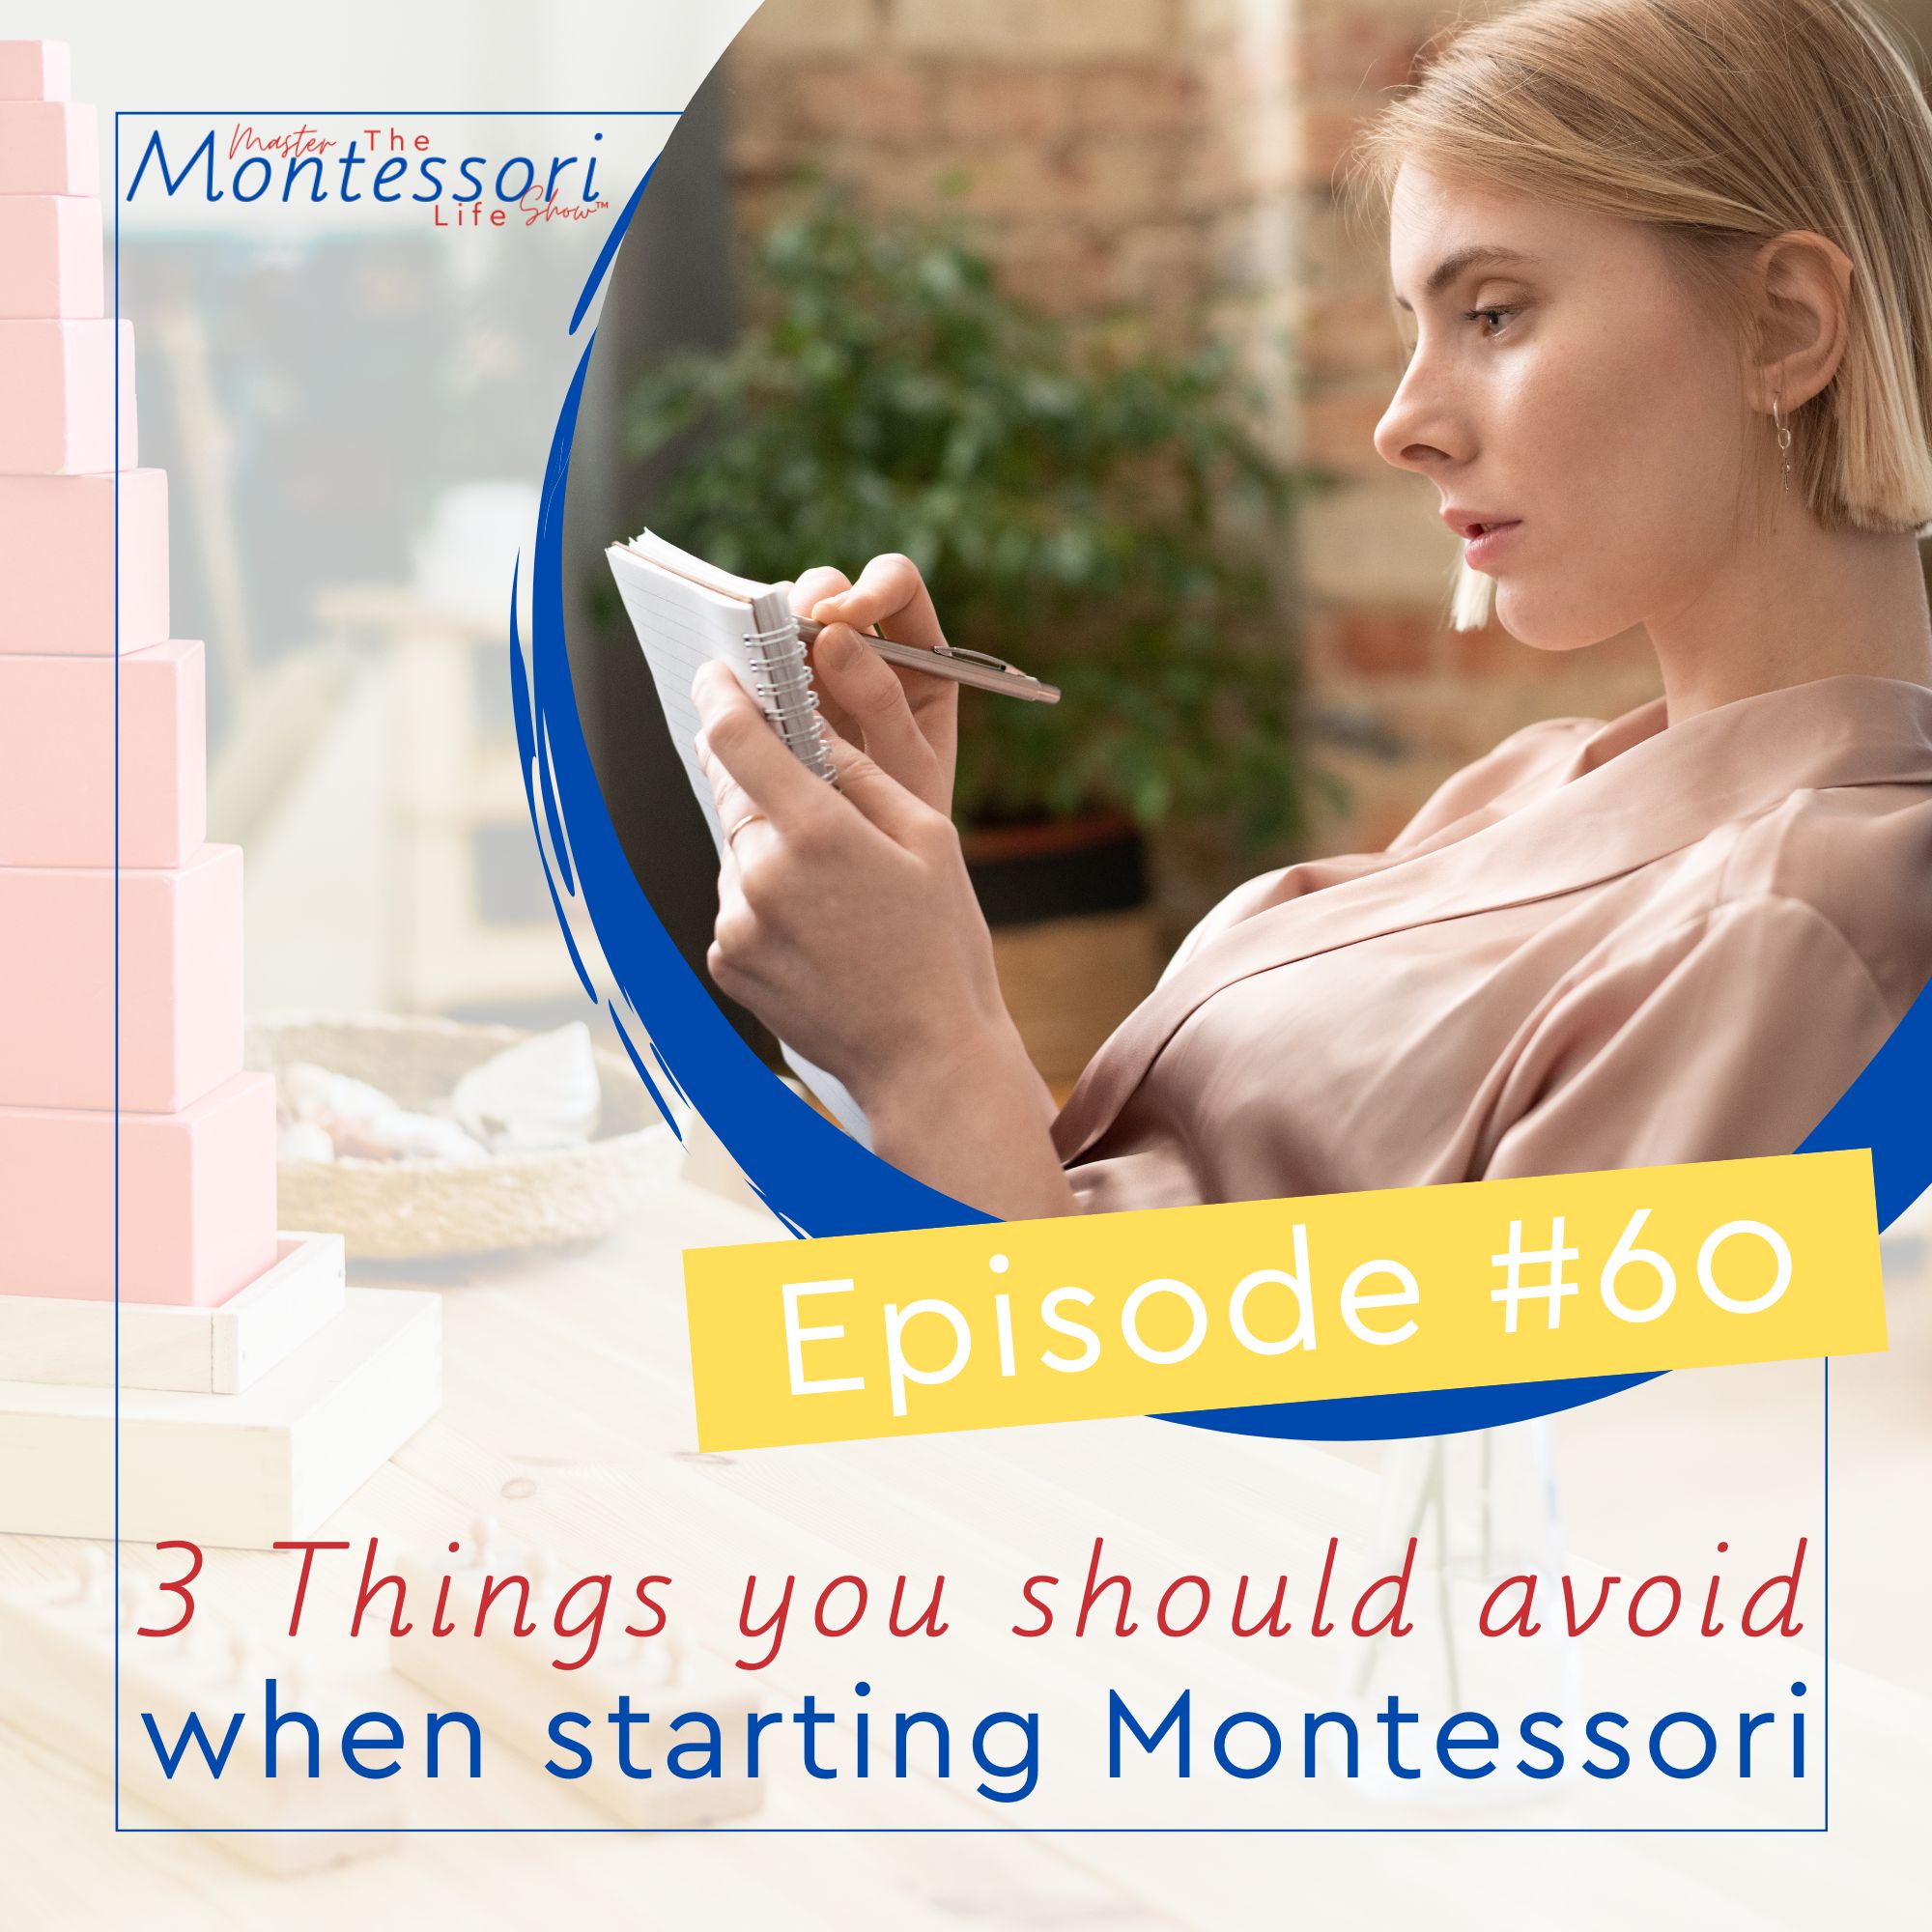 Episode 60: 3 Things you should avoid when starting Montessori